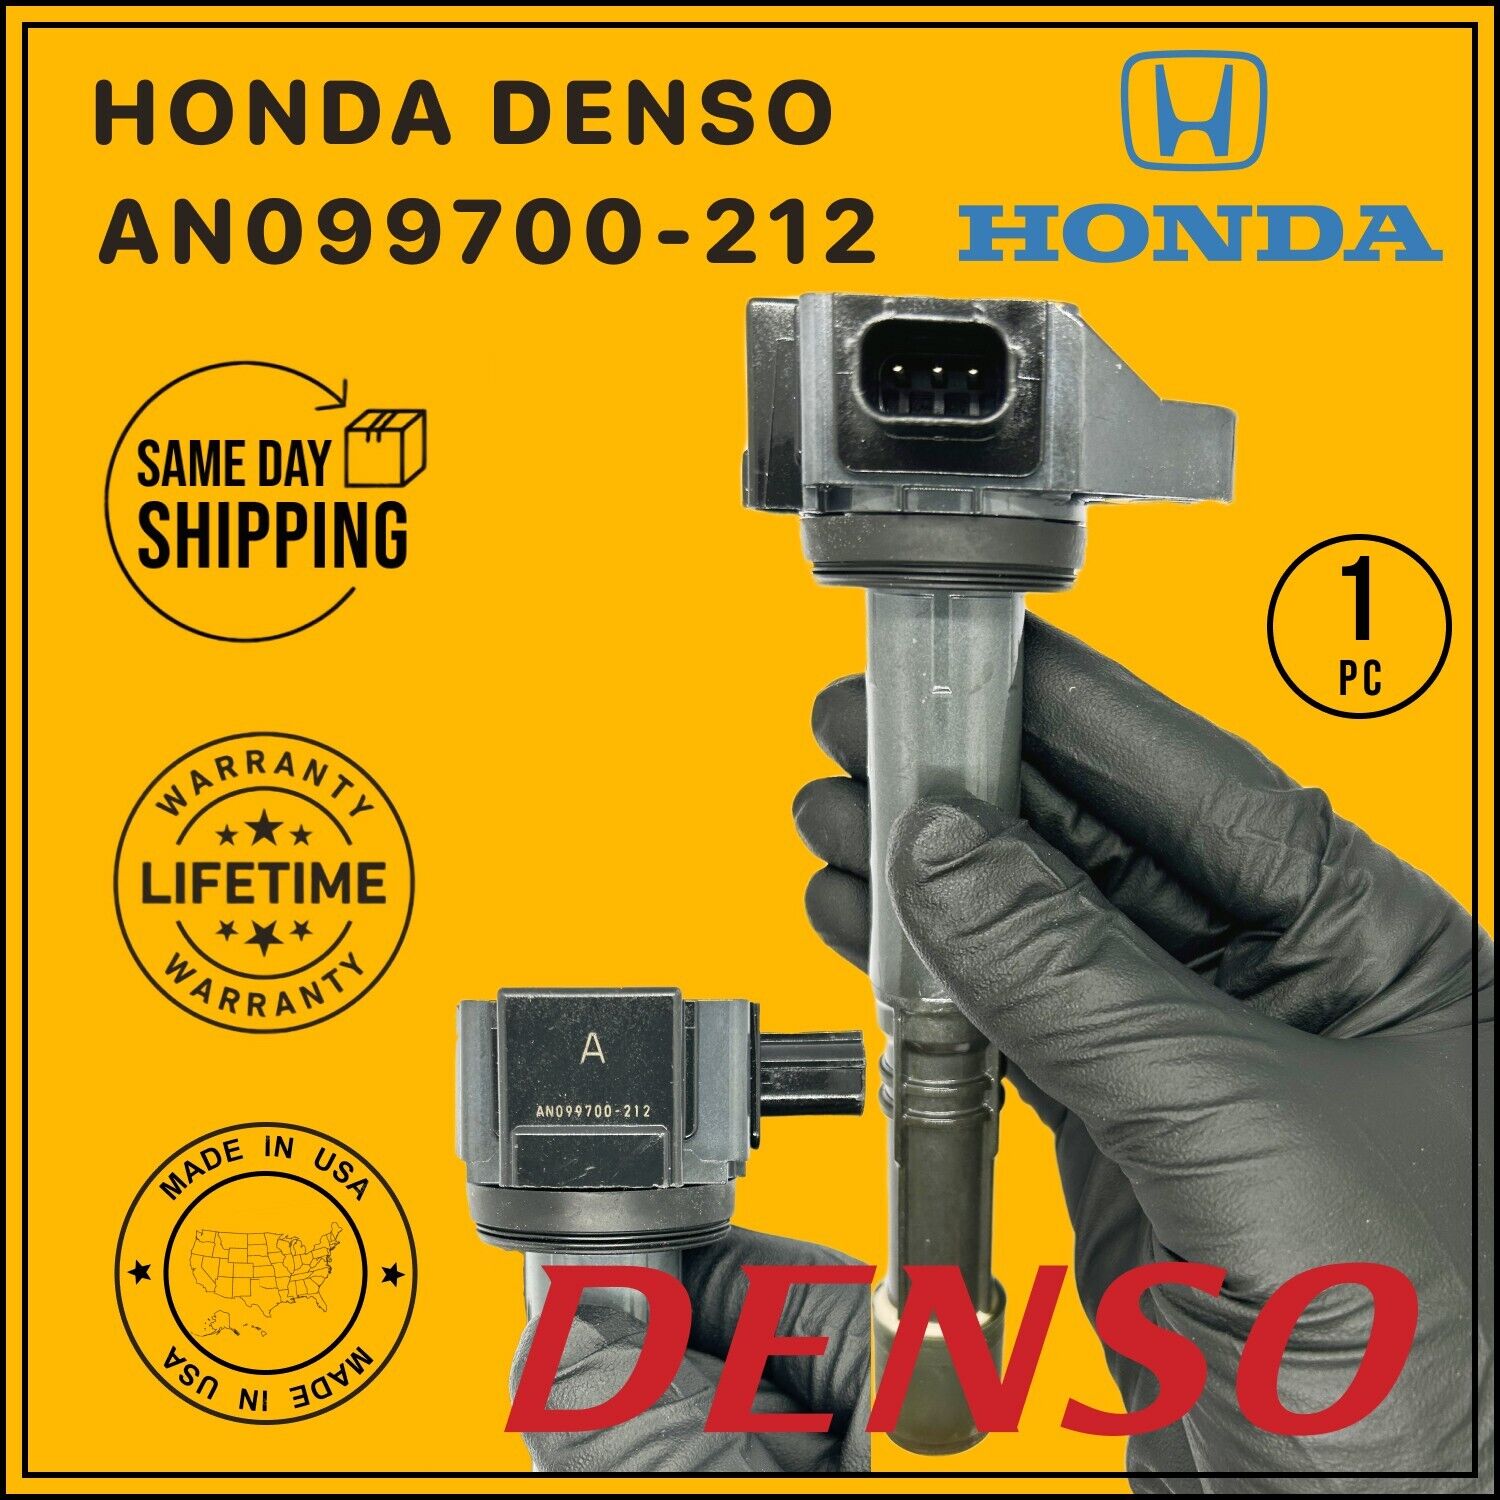 AN099700-212 OEM Denso x1 Ignition Coil For 13-21 Acura ILX TLX Honda Accord  L4